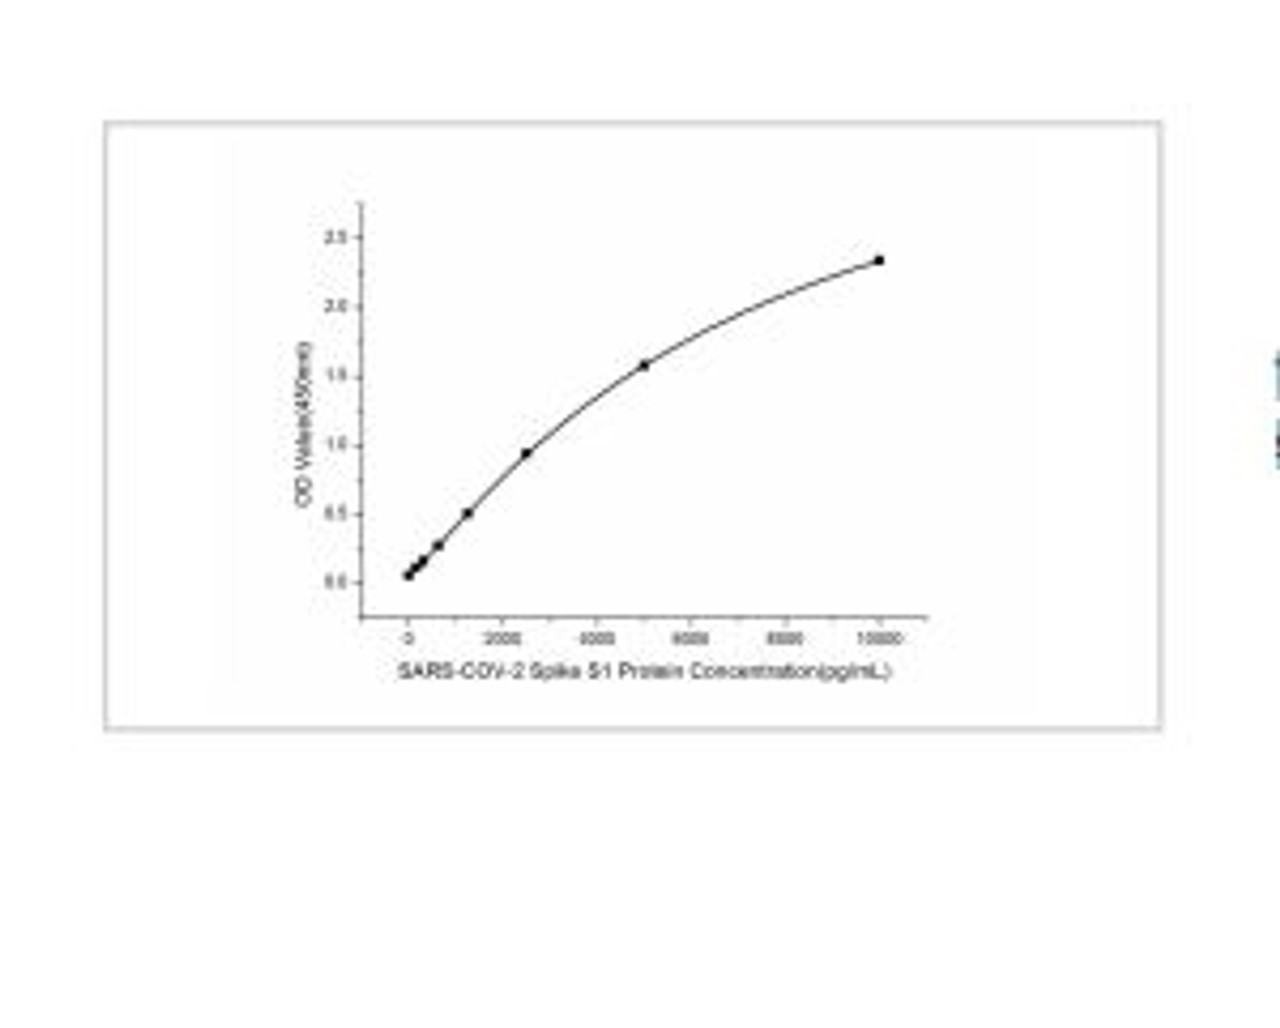 This standard curve is only for demonstration purposes. A standard curve should be generated for each assay.